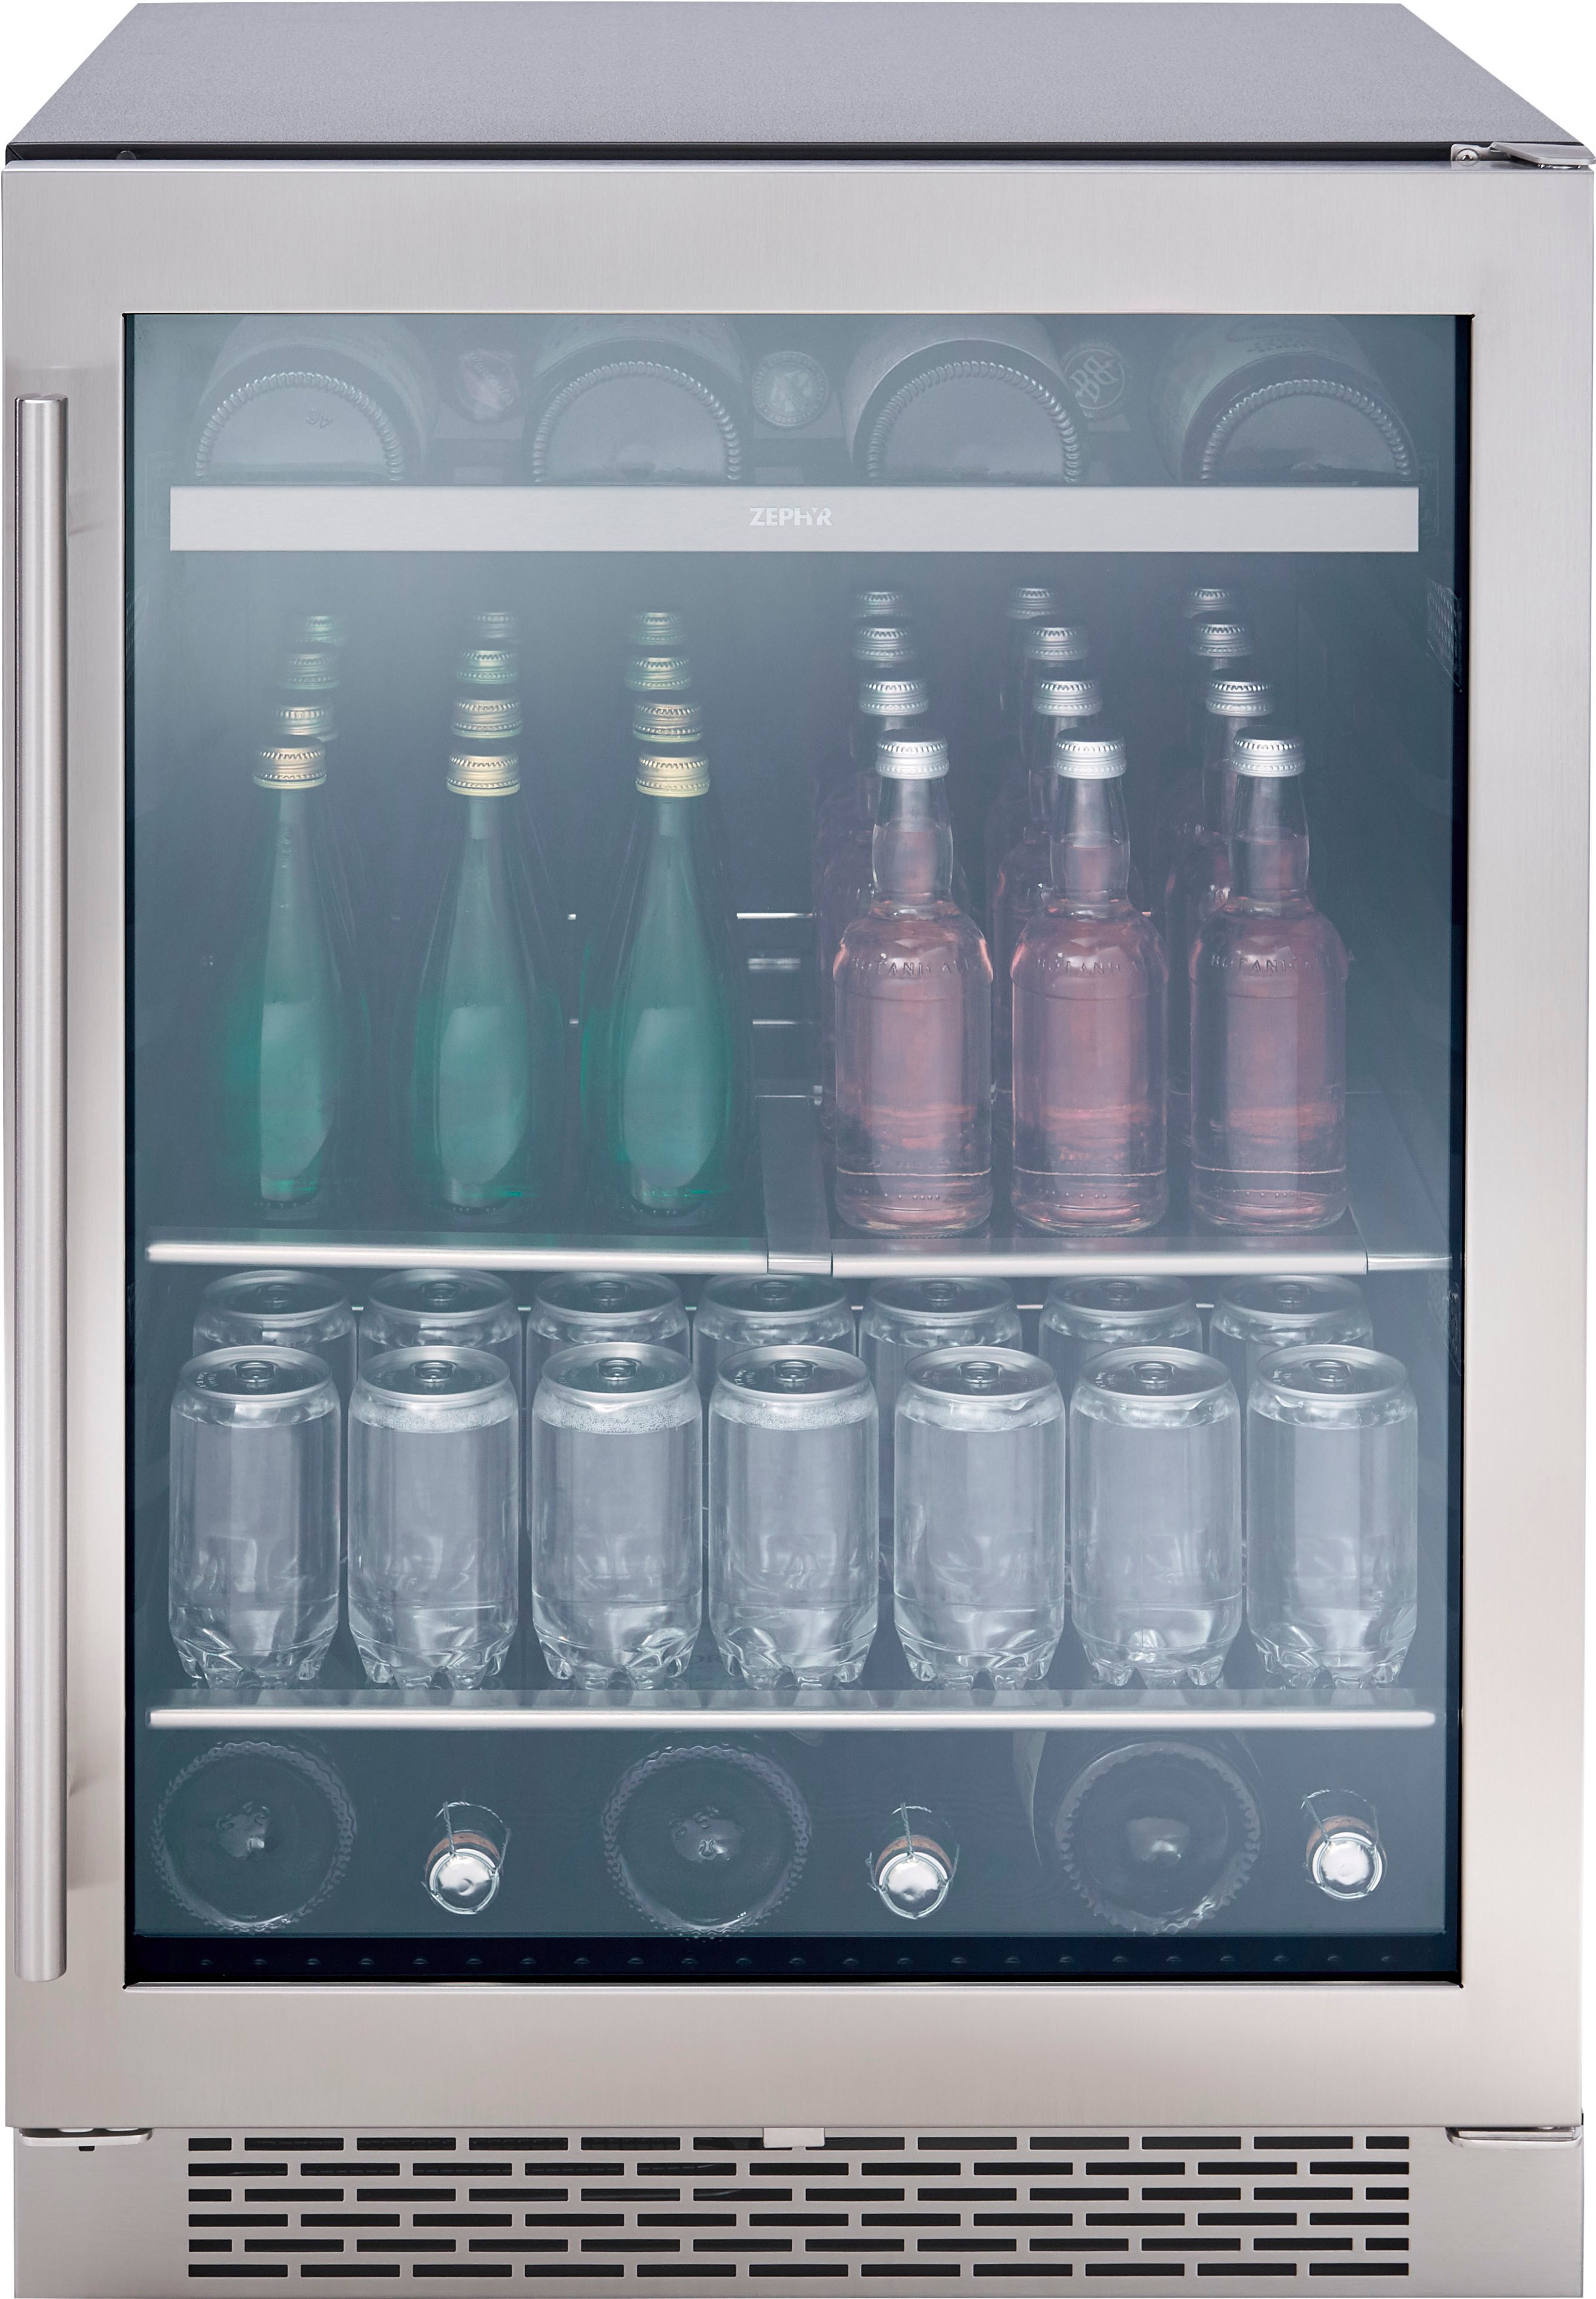 Zephyr - Presrv 24 in. 7-Bottle and 112 Can Single Zone Beverage Cooler - Stainless steel and glass